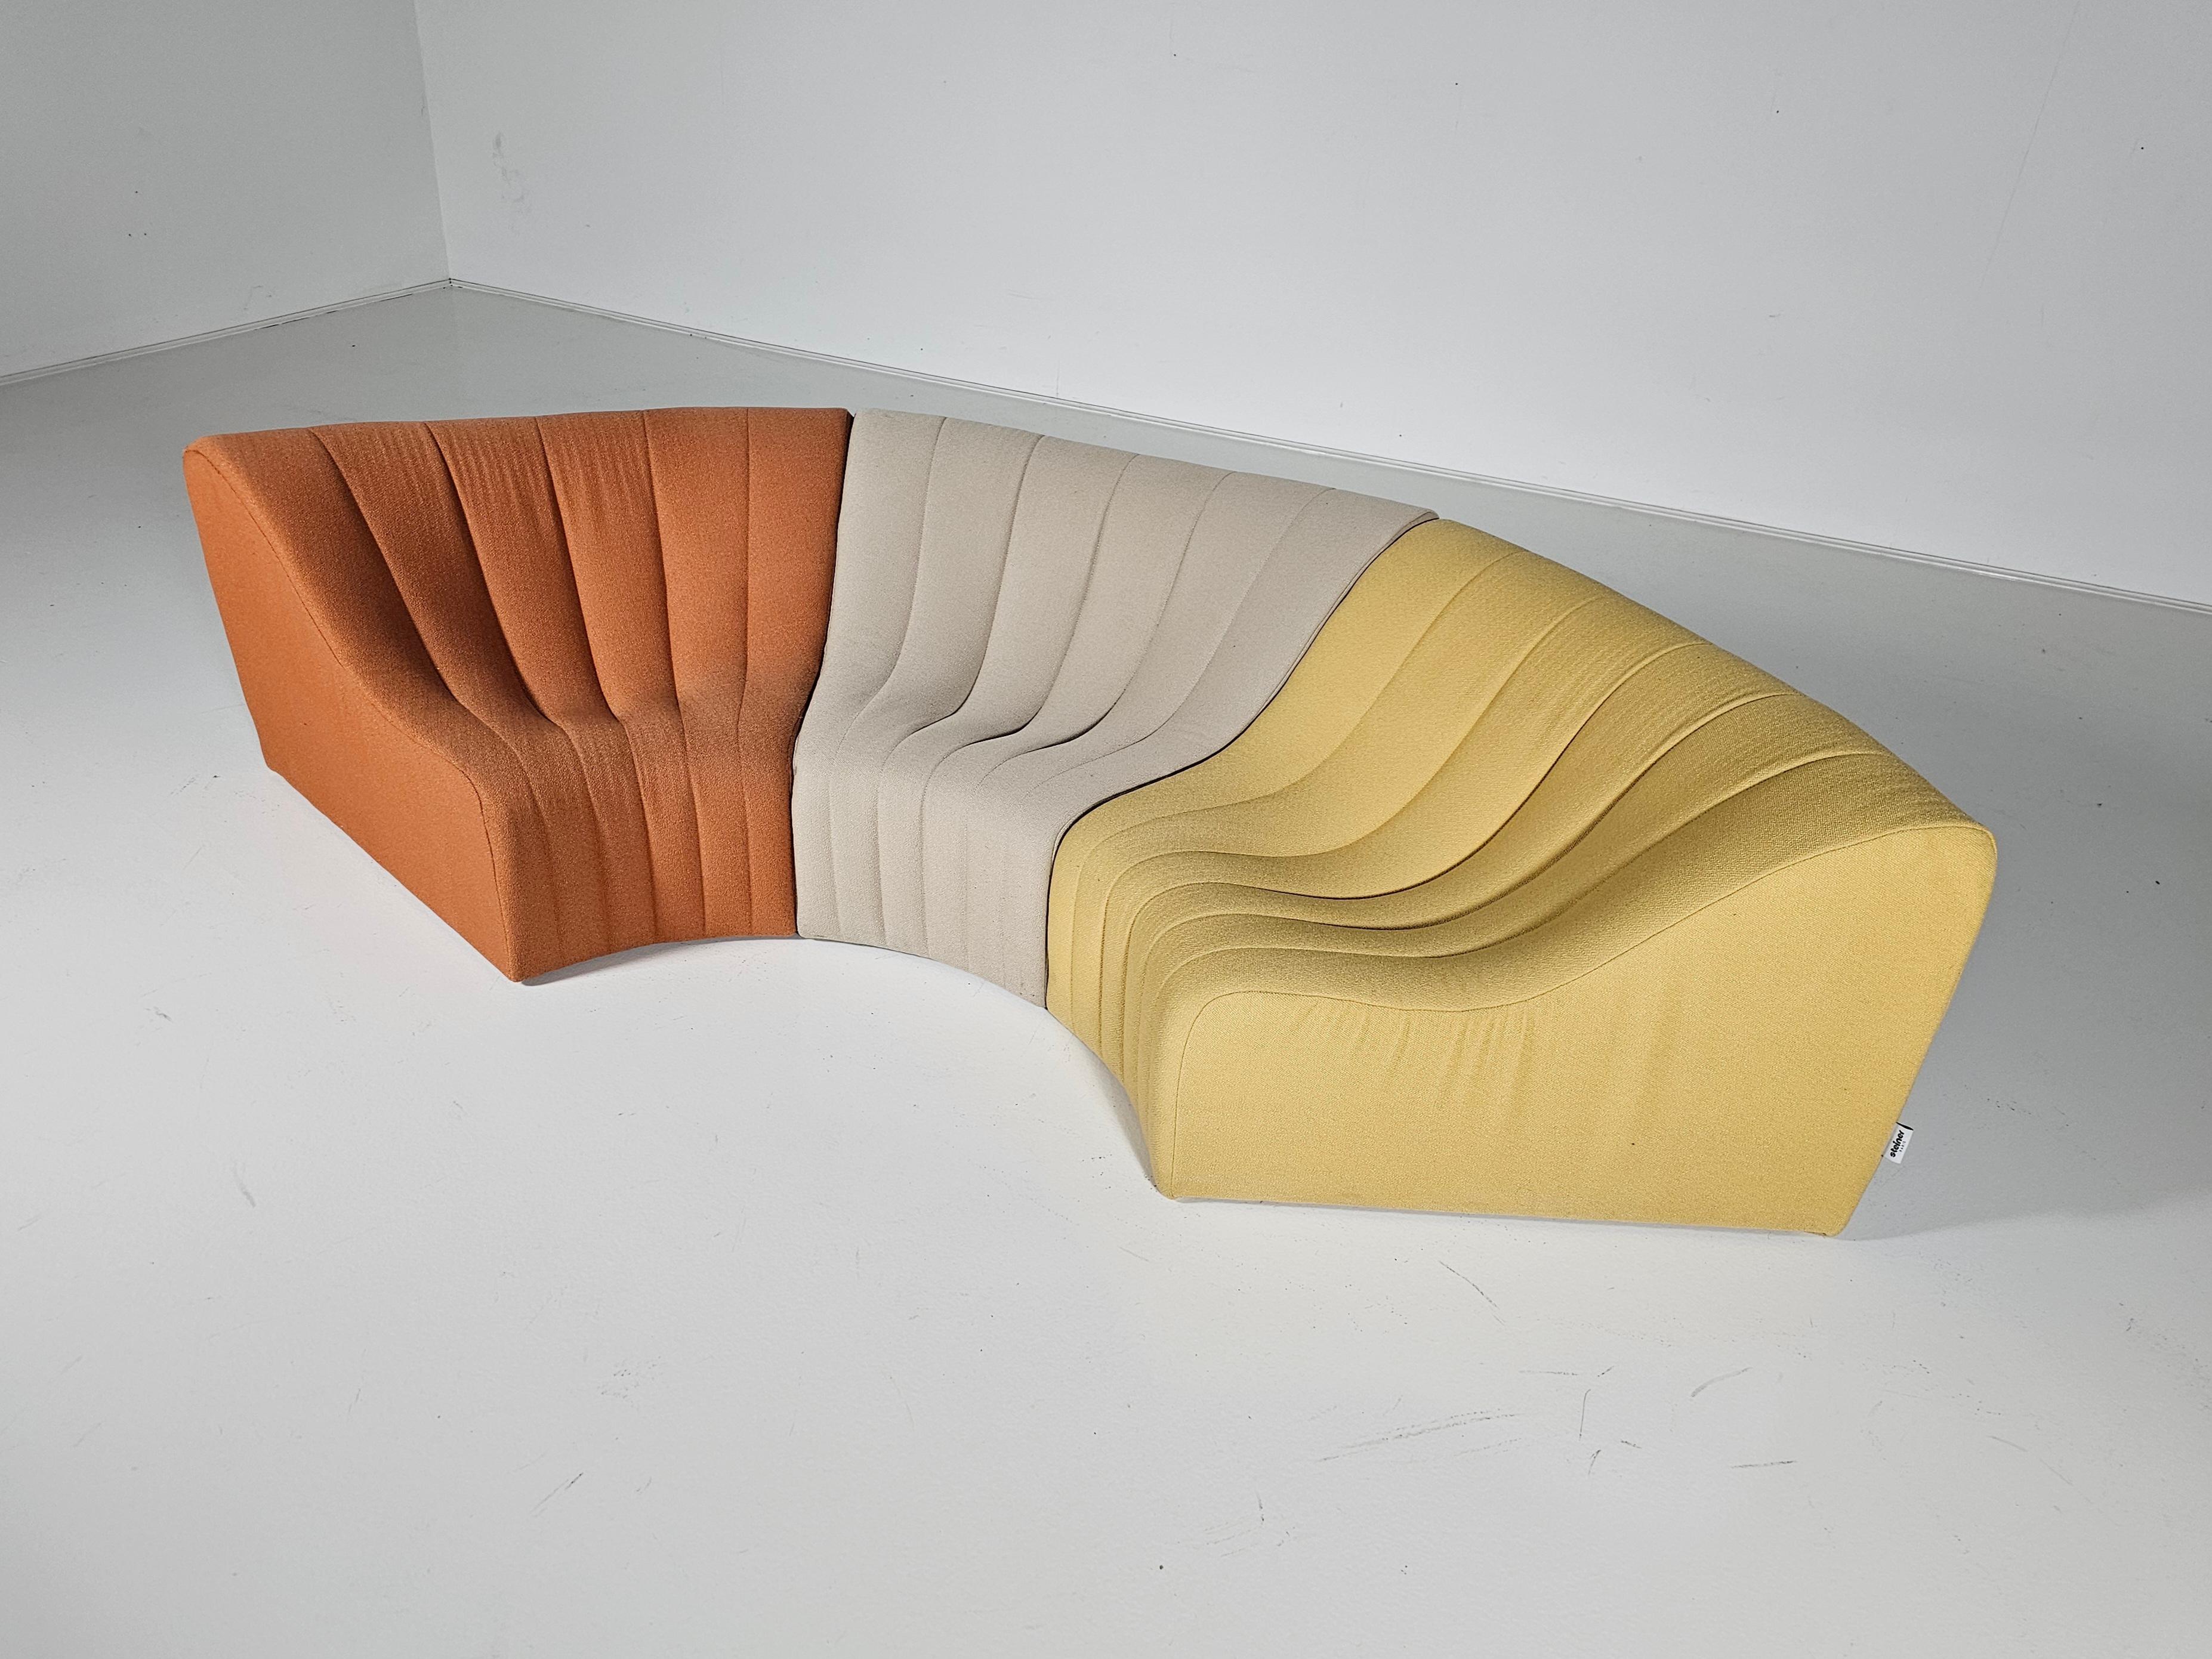 Kwok Hoi Chan for Steiner, sectional sofa, model ´chromatic´, fabric, France, 1970

This seamless seating system consists of three elements, which allow the creation of different configurations. The bright-colored fabric is still original and in